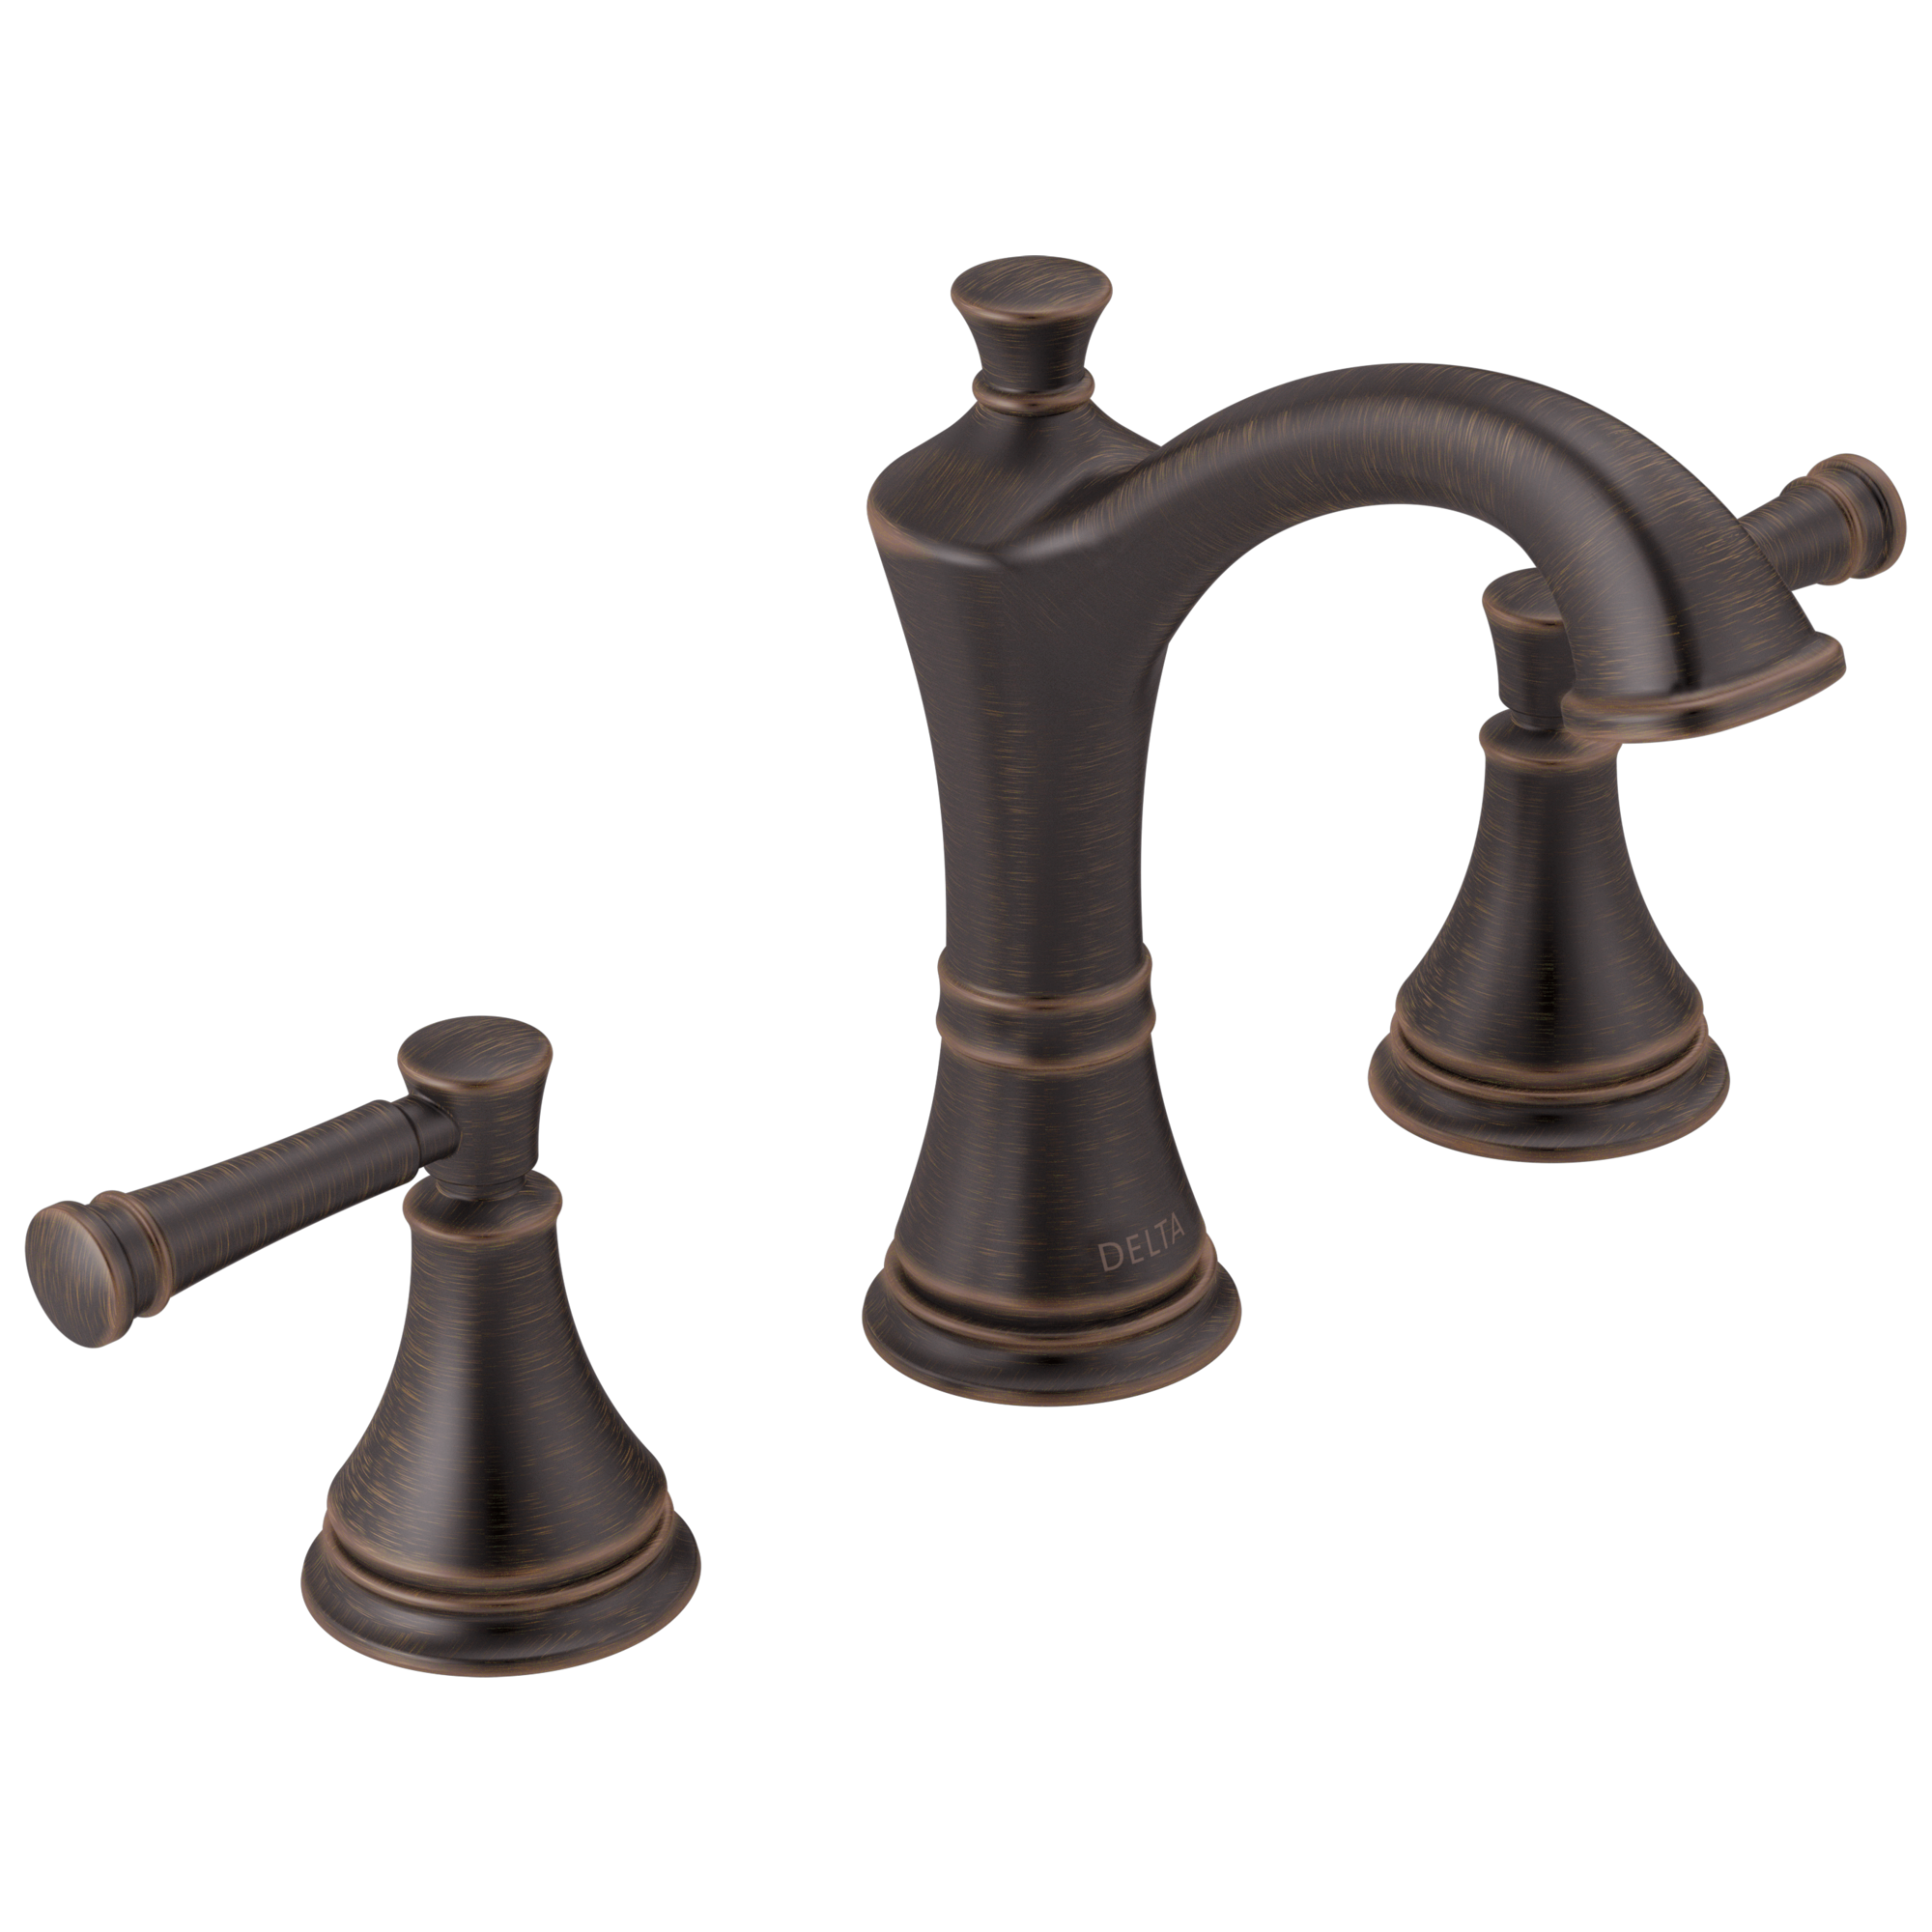 Venetian Bronze 35777LF-RB Delta Faucet Mylan 2-Handle Widespread Bathroom Faucet with Drain Assembly and Worry-Free Drain Catch